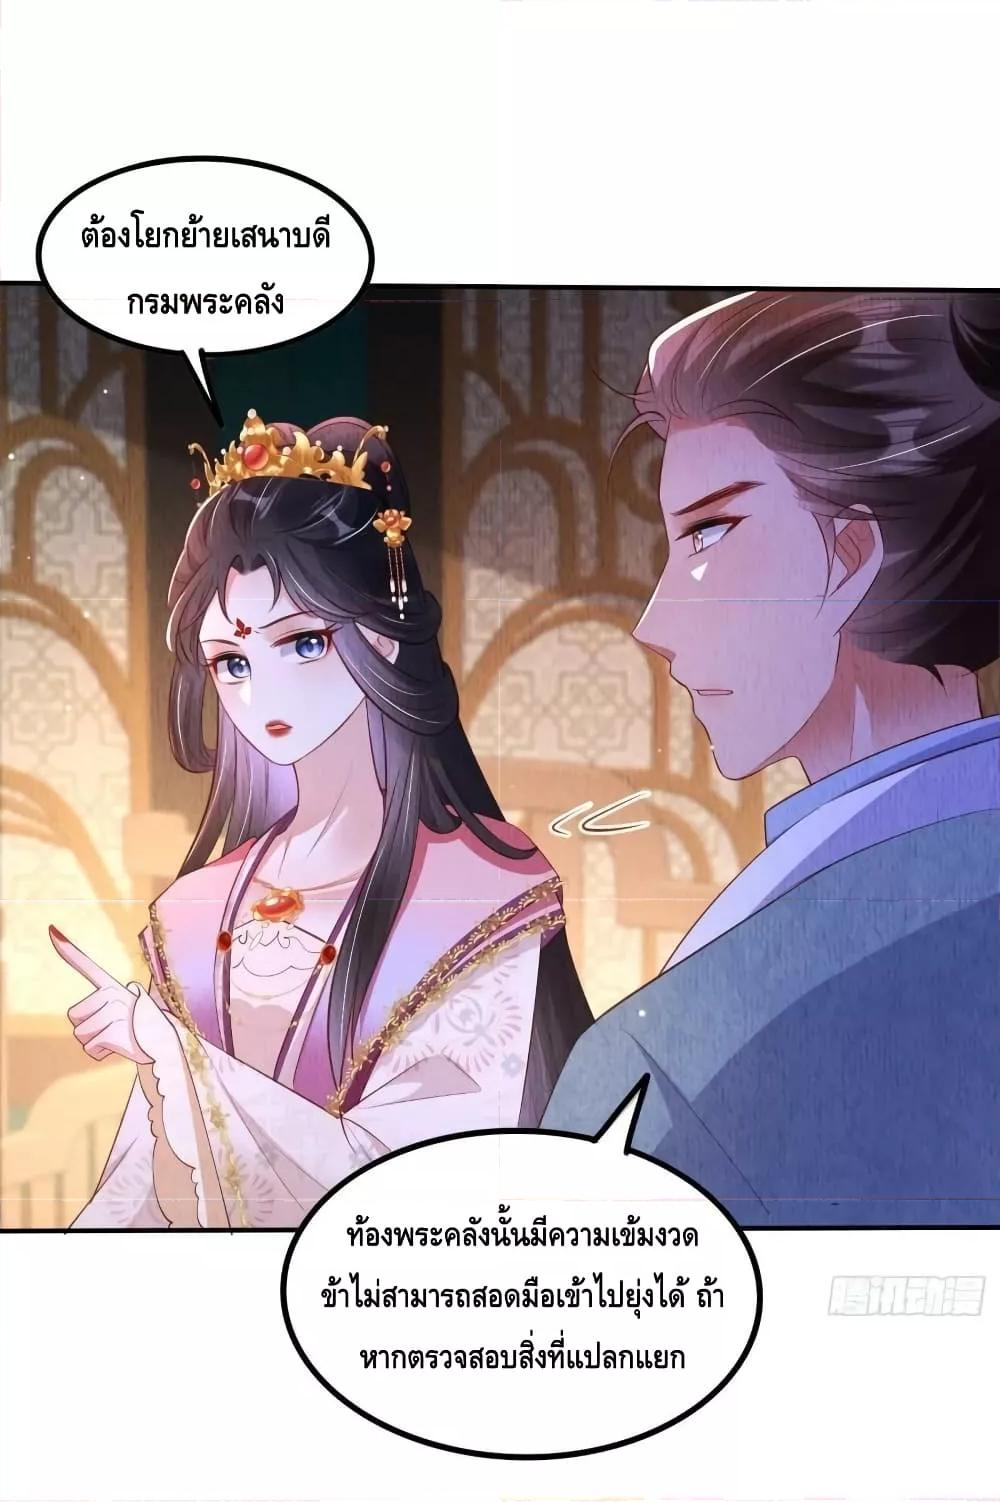 After I Bloom, a Hundred Flowers Will ill – ดอกไม้นับ ตอนที่ 53 (7)